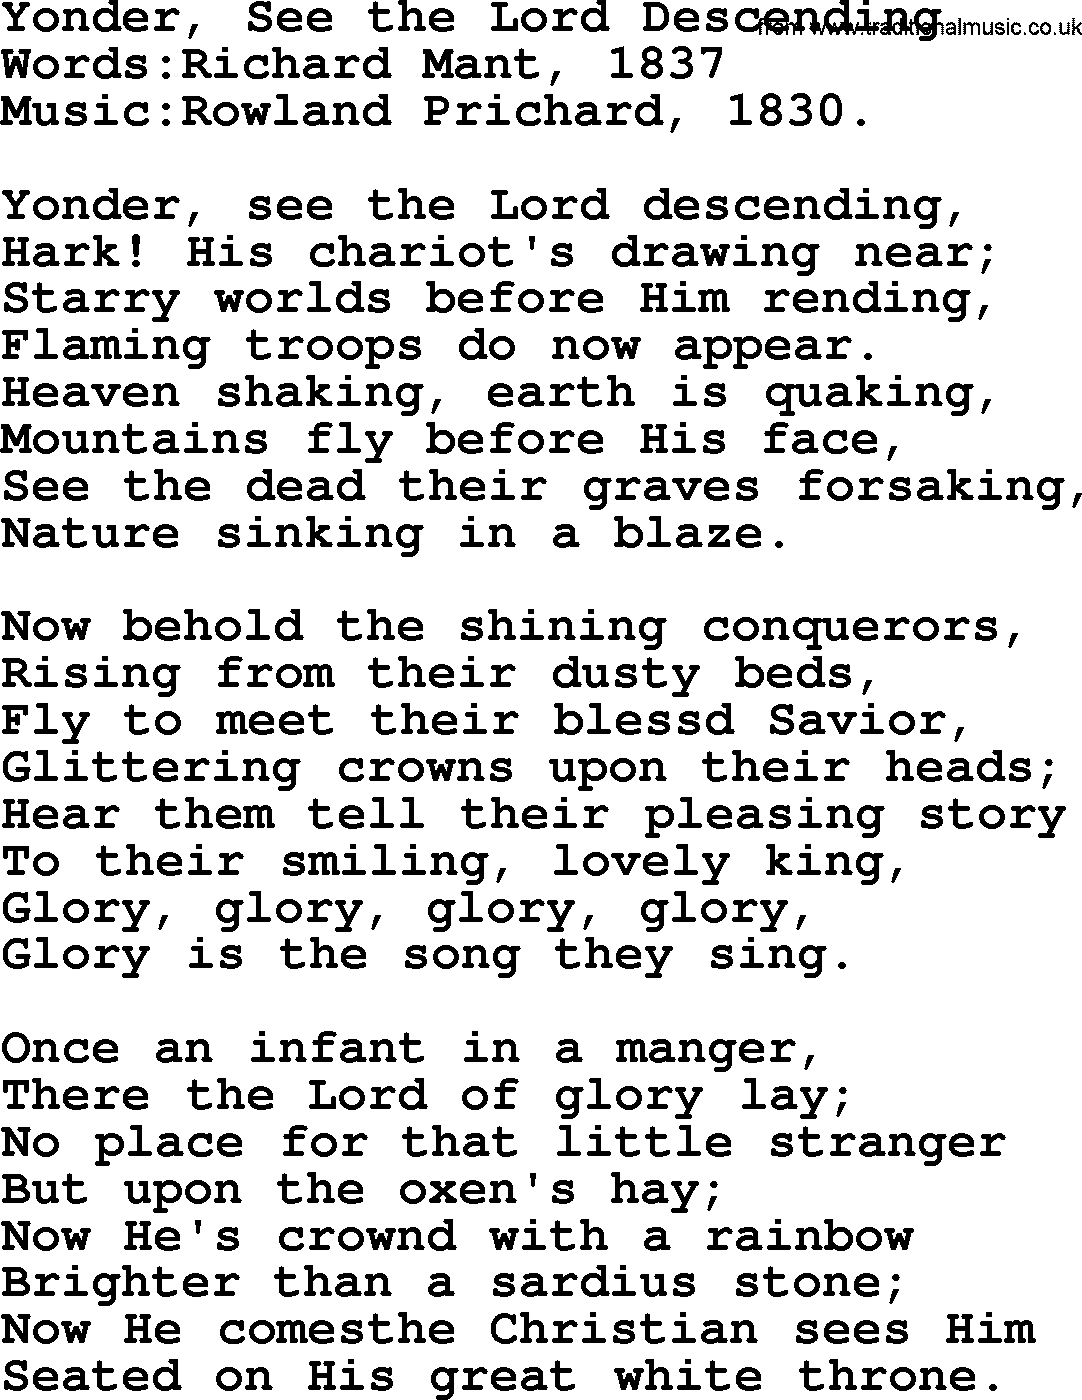 Christian hymns and songs about Jesus' Return(The Second Coming): Yonder, See The Lord Descending, lyrics with PDF